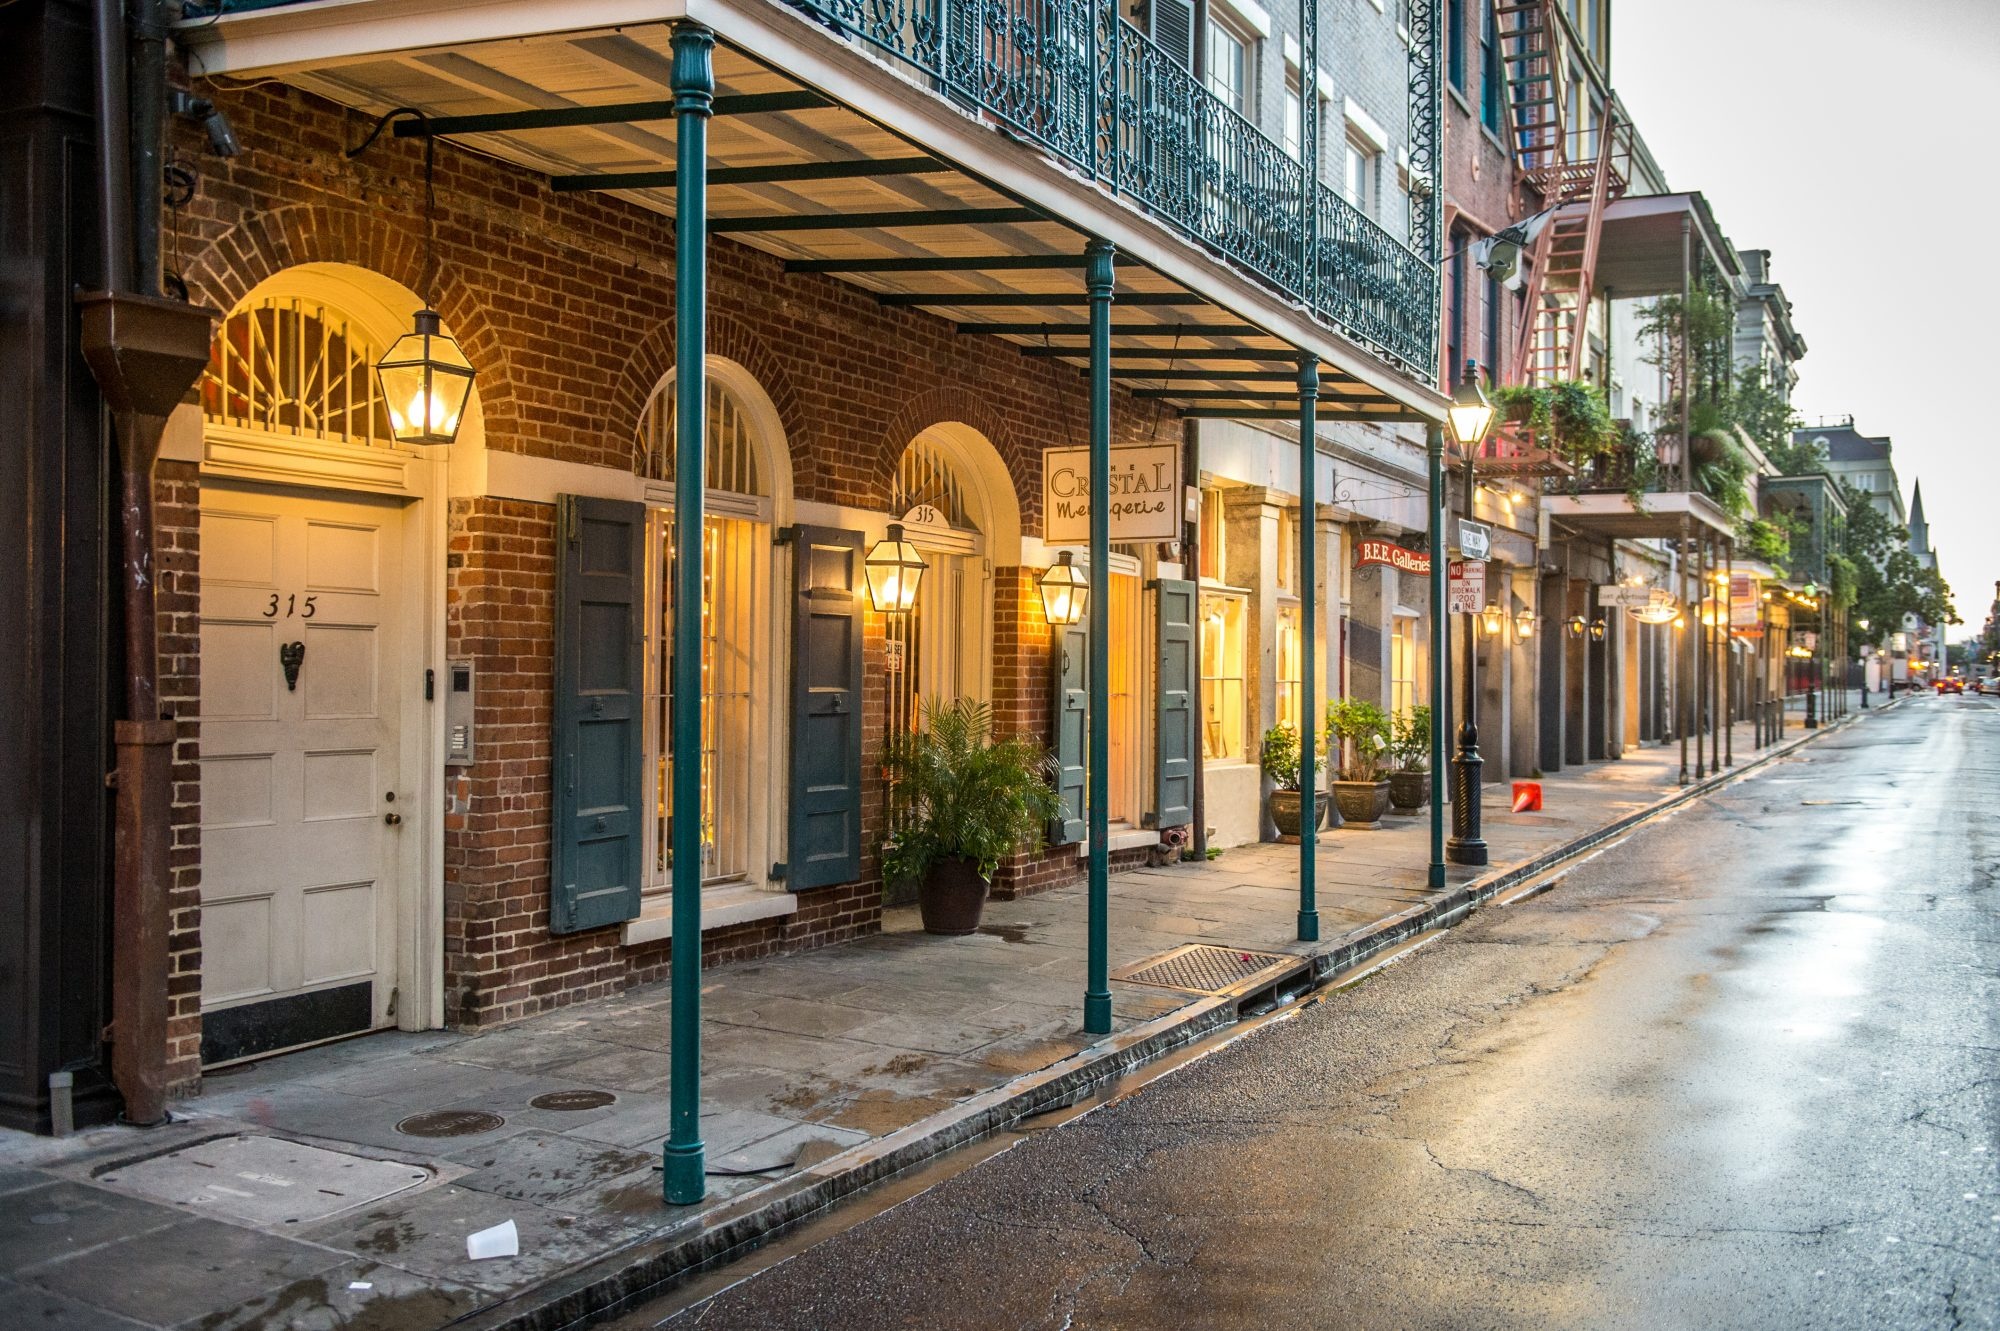 New Orleans travels, Big Easy nickname, Southern living, Unique charm, 2000x1340 HD Desktop